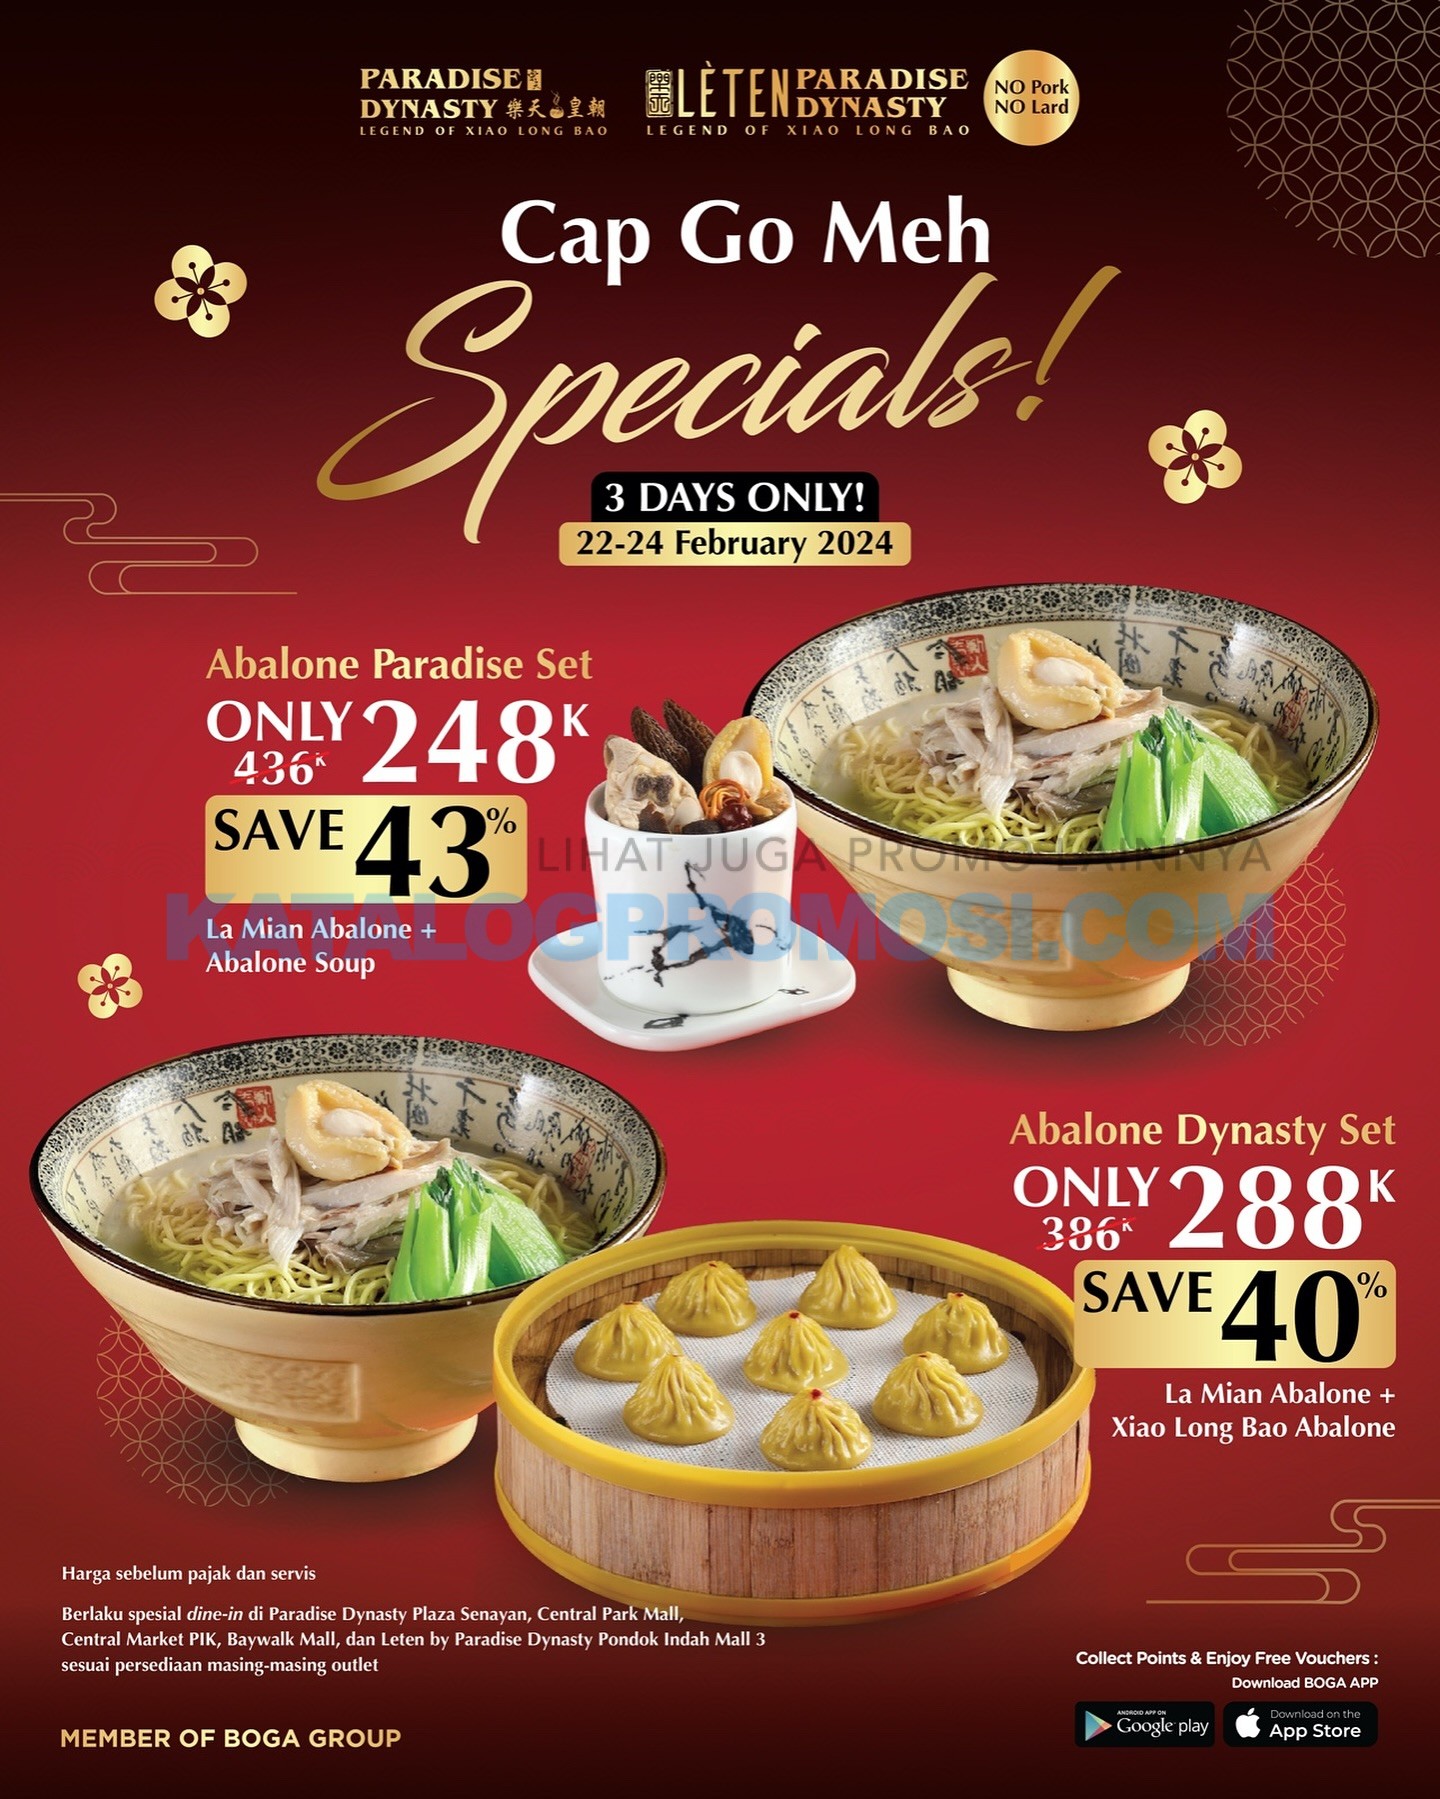 Promo Paradise Dynasty CAP GO MEH SPECIAL SET - SAVE up to 43% off